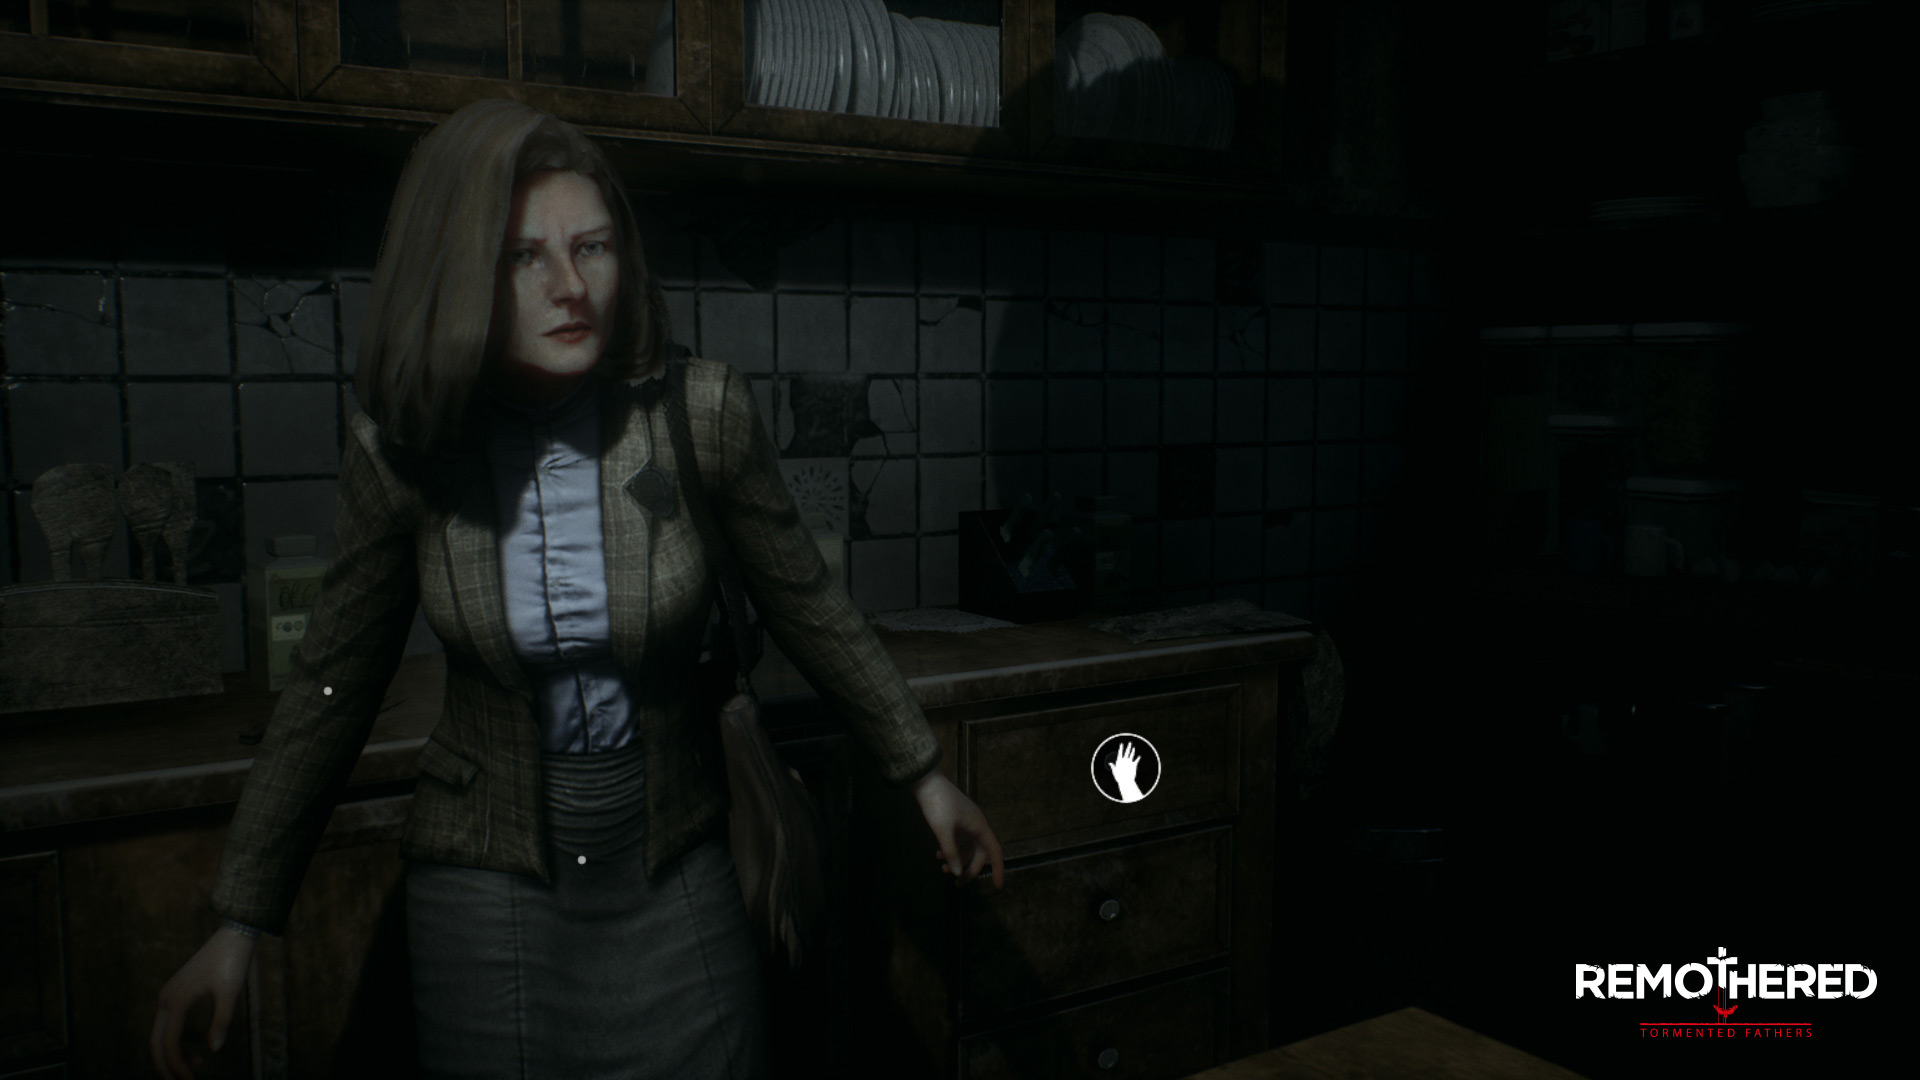 Remothered: Tormented Fathers 